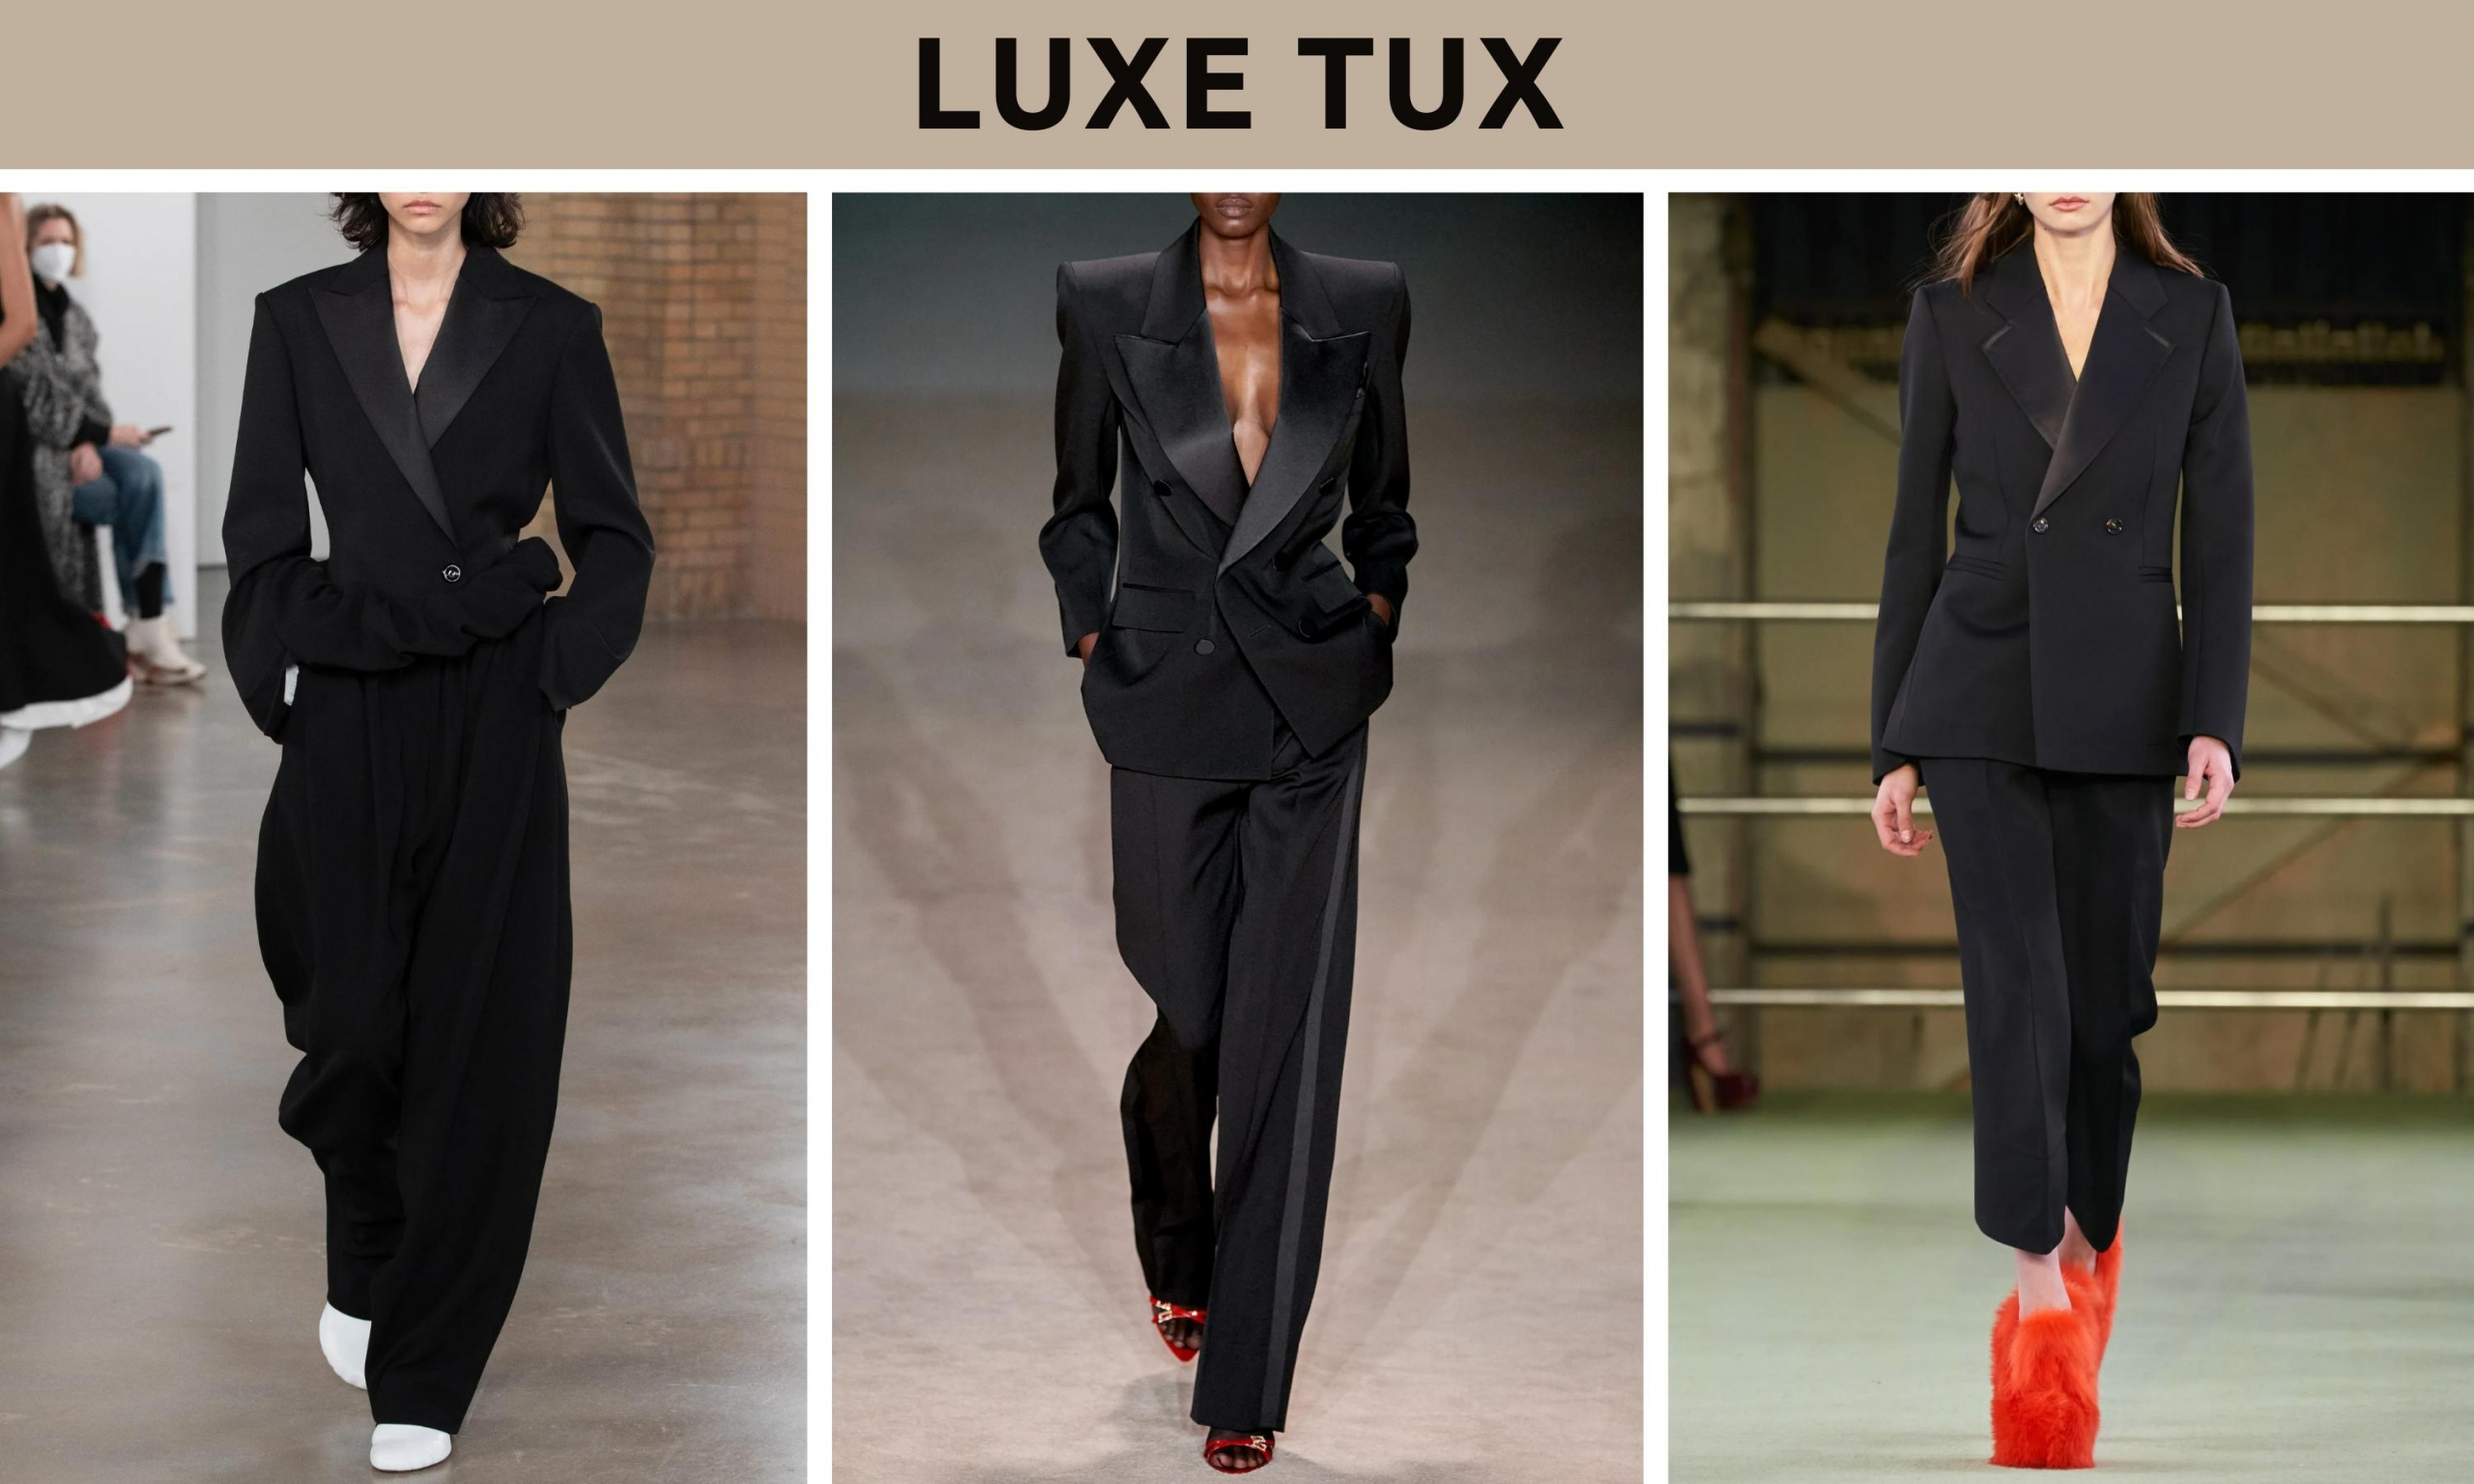 wearable fall trends, fall fashion trends, fall trends, wearable trends, how to wear trends, trends over 40, wearing trends over 40, 2022 fall fashion trends, 2022 wearable fall trends, luxe tux, evening wear trends